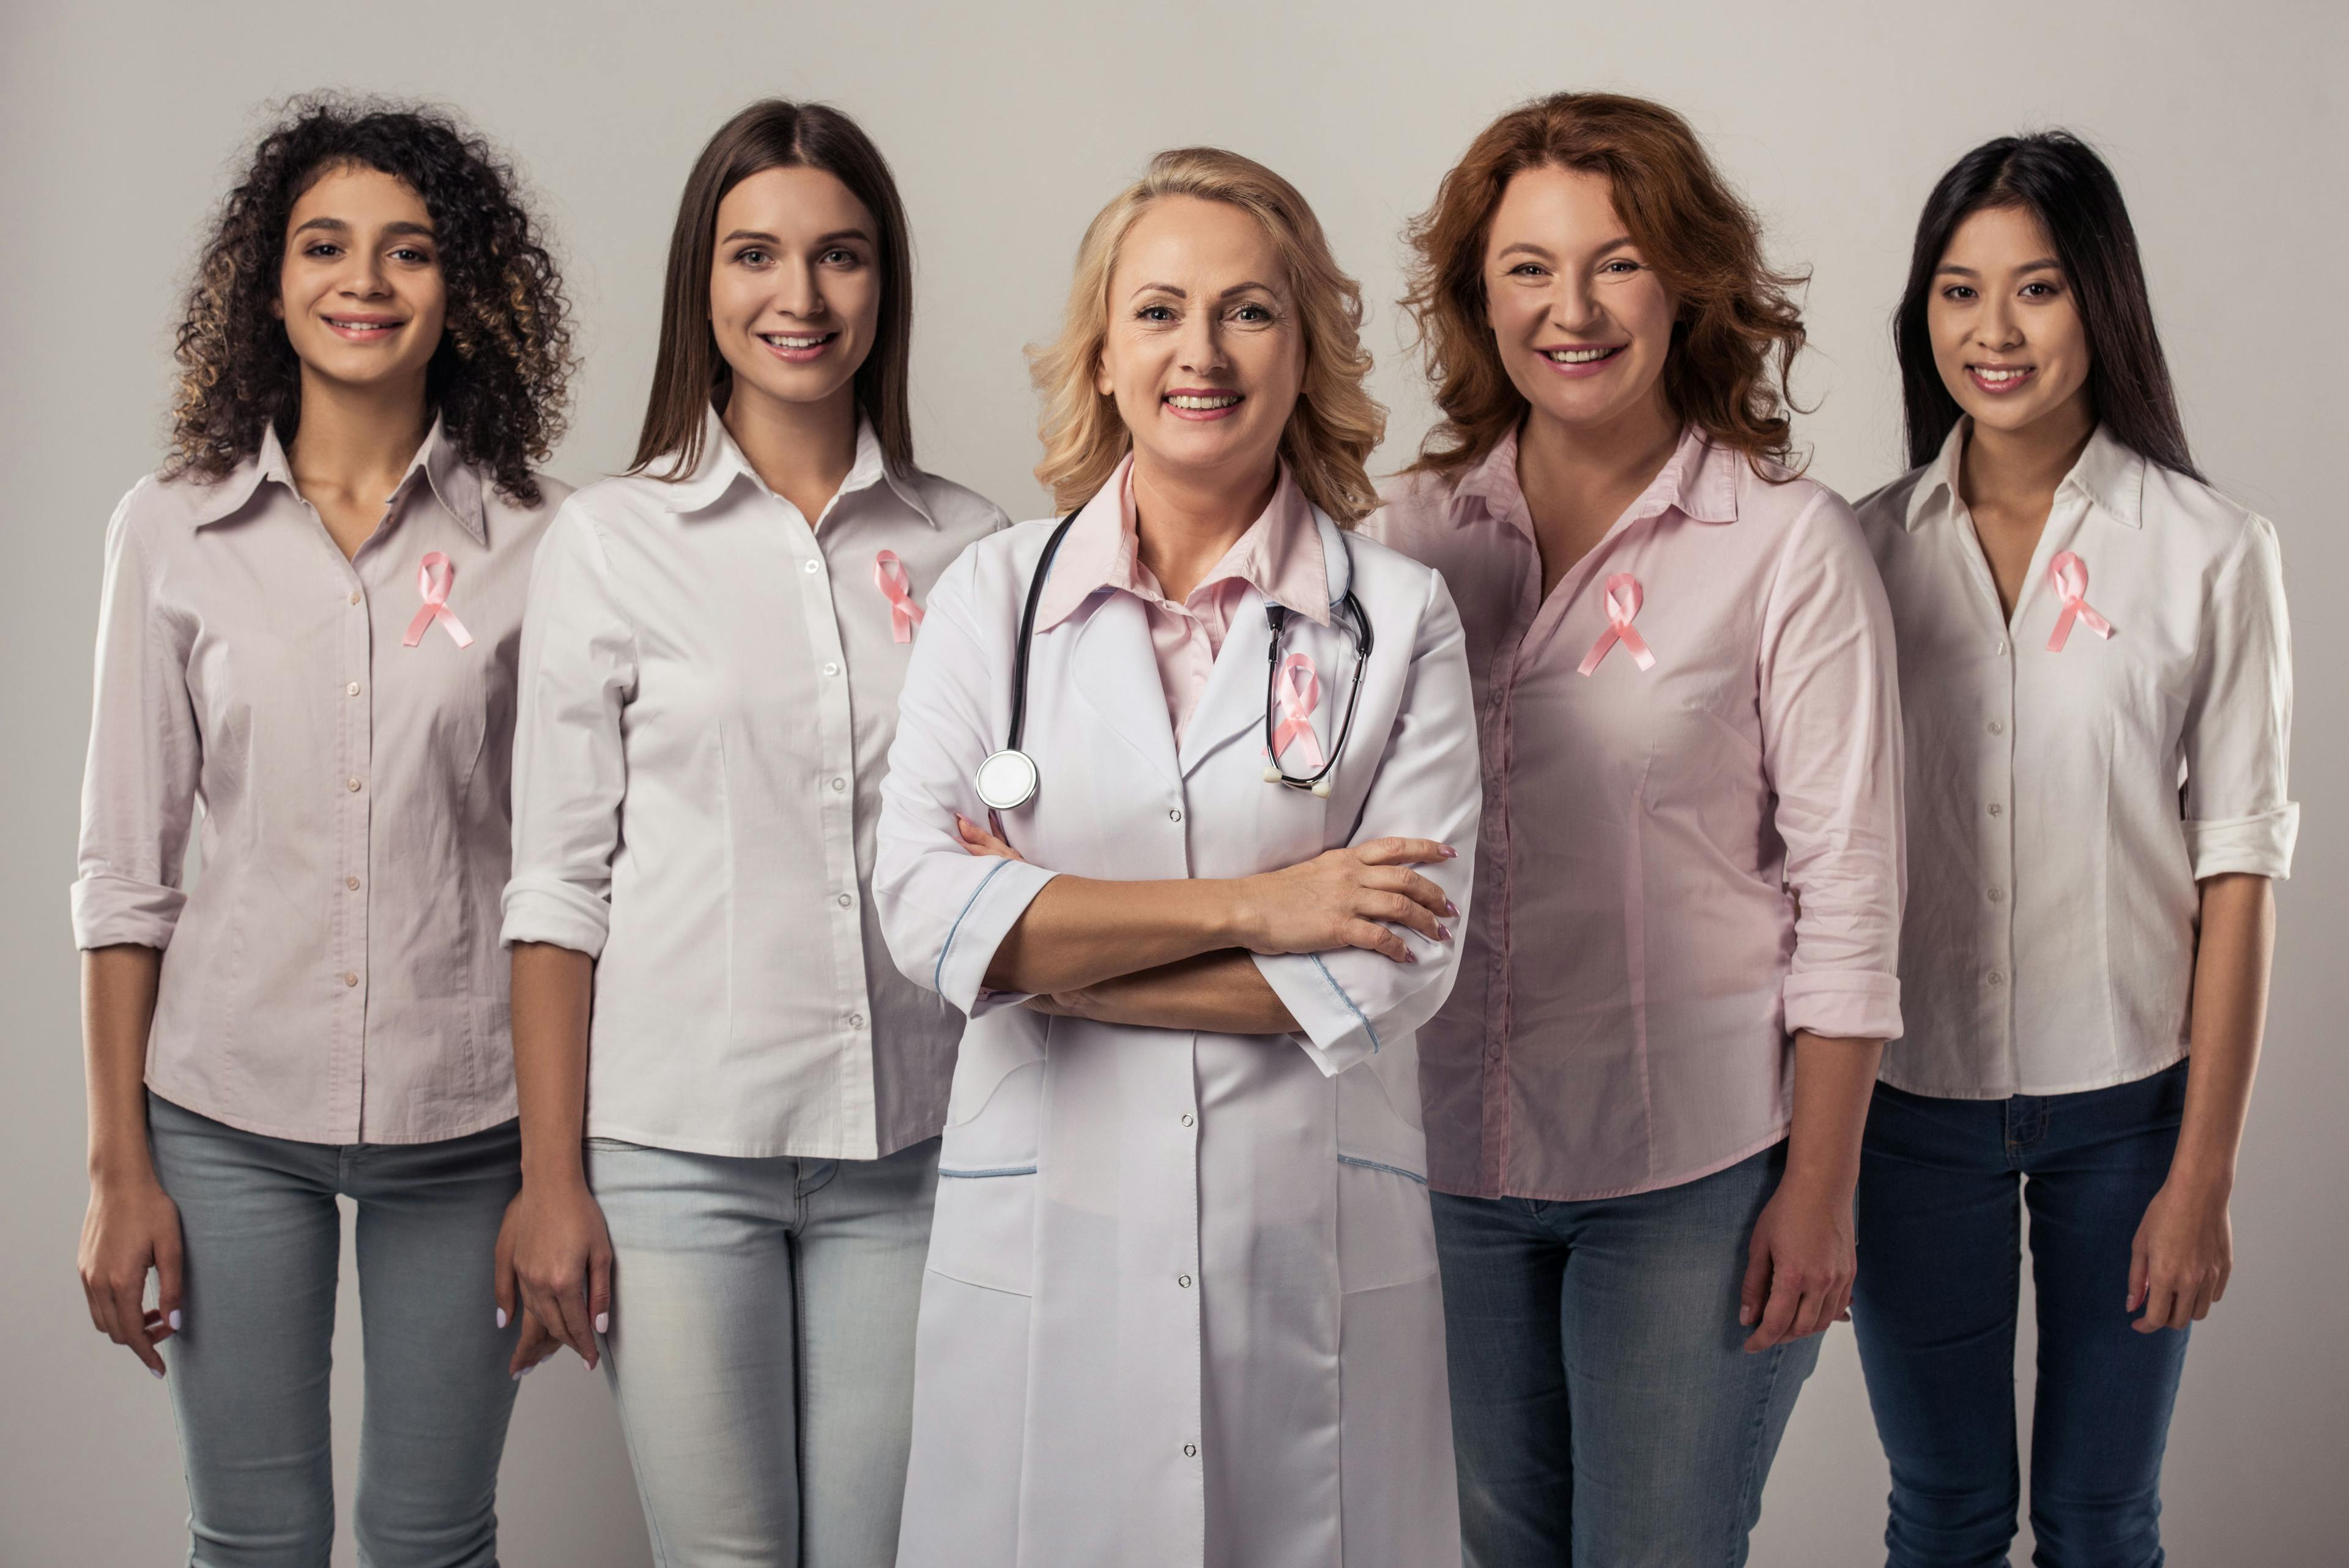 Young women with breast cancer | Image Credit: georgerudy - stock.adobe.com